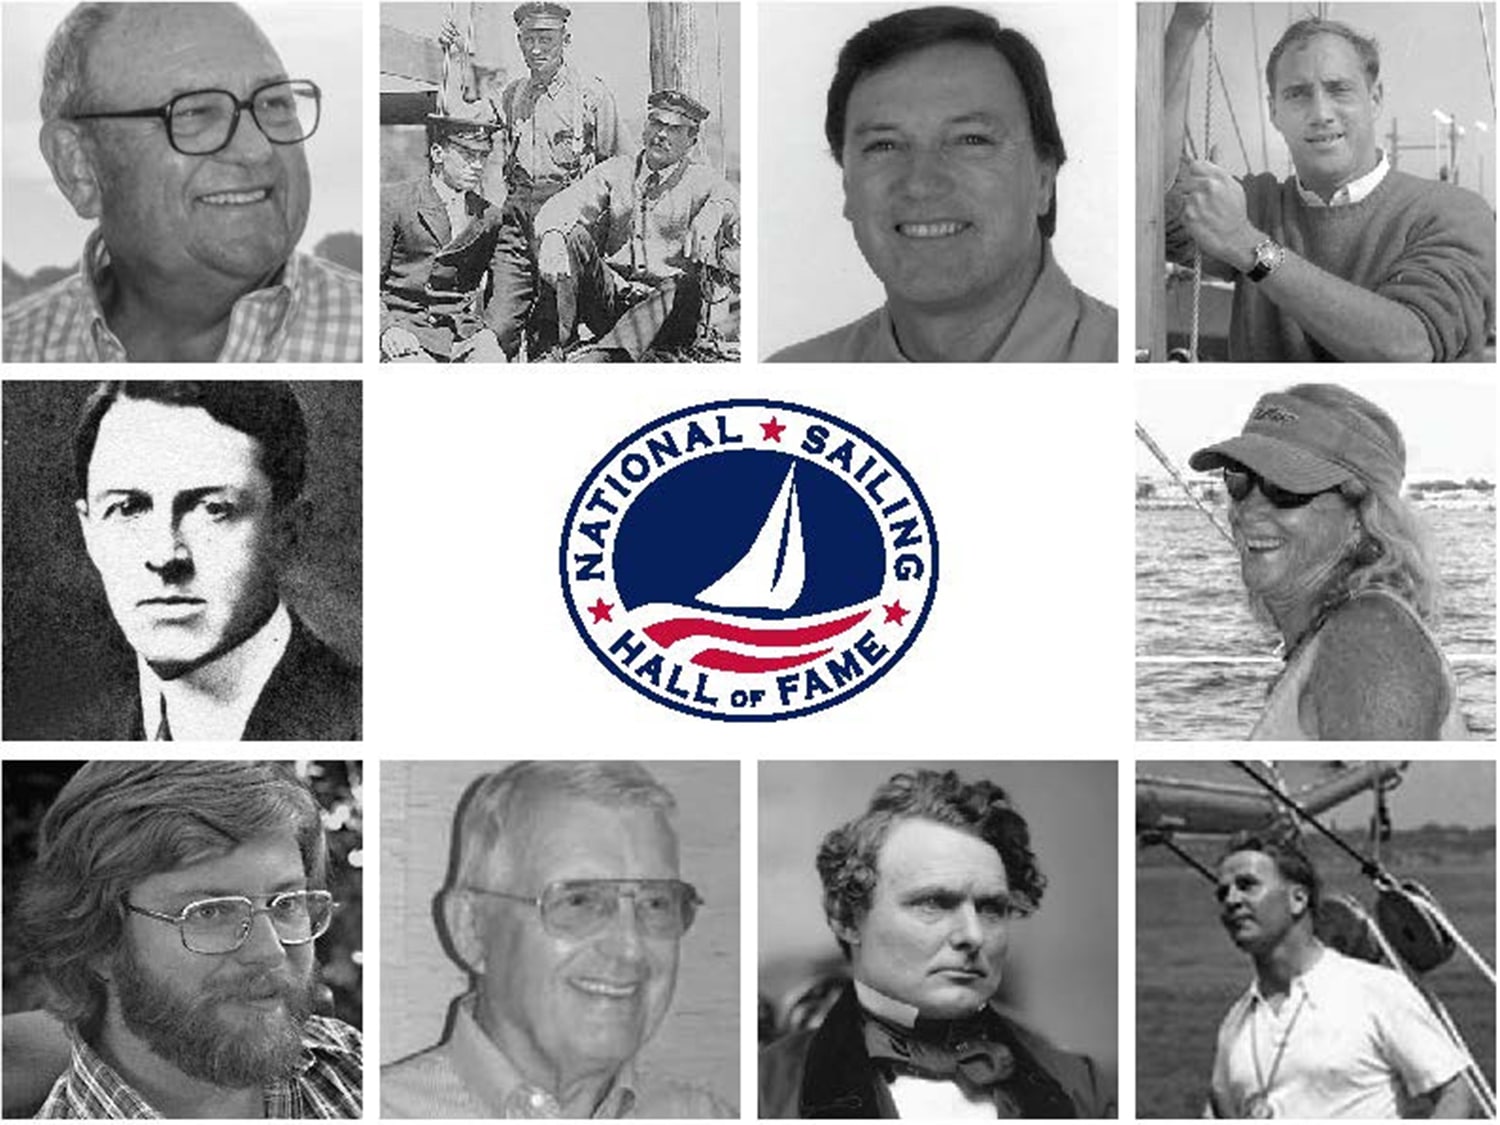 America's Cup Hall of Fame announces 2019 inductees - Trade Only Today